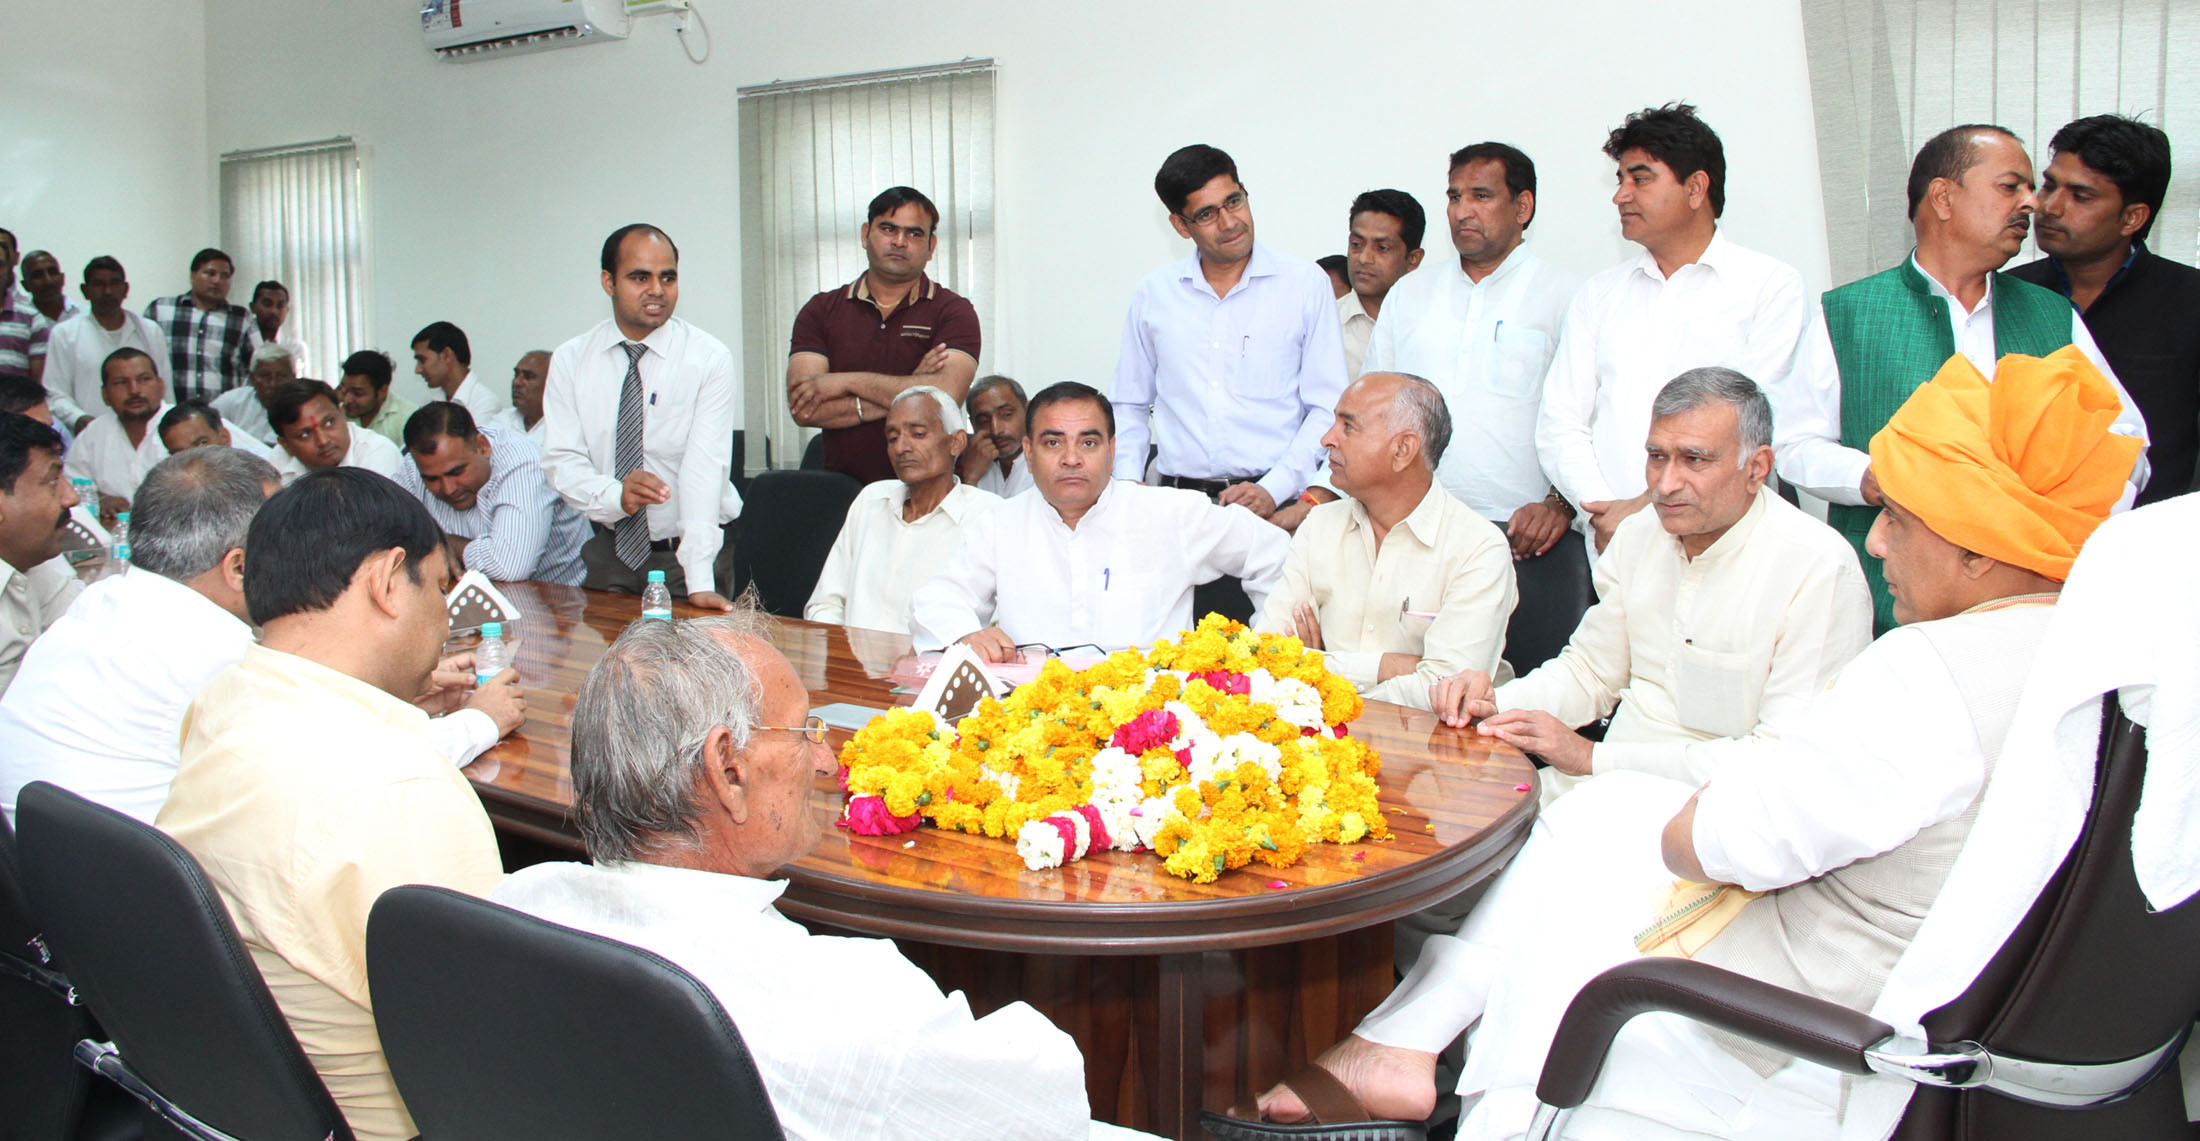 A group of farmers from Ghaziabad calling on the Union Home Minister, Shri Rajnath Singh, in New Delhi on March 27, 2016.